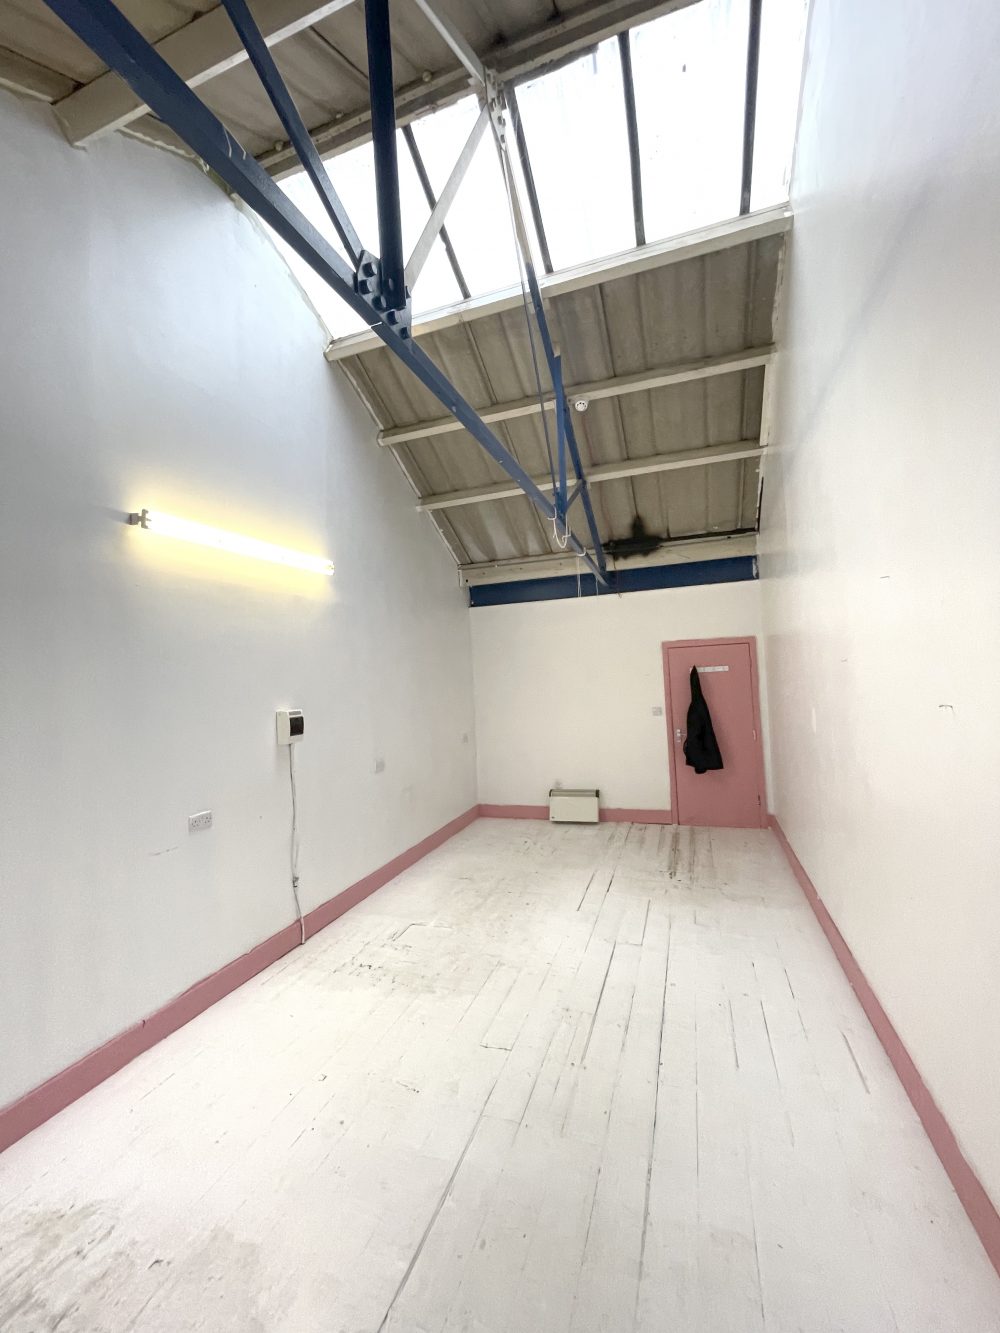 first floor light idustrial creative artist studio to rent in N16 Stoke Newington Shelford Place Pic1